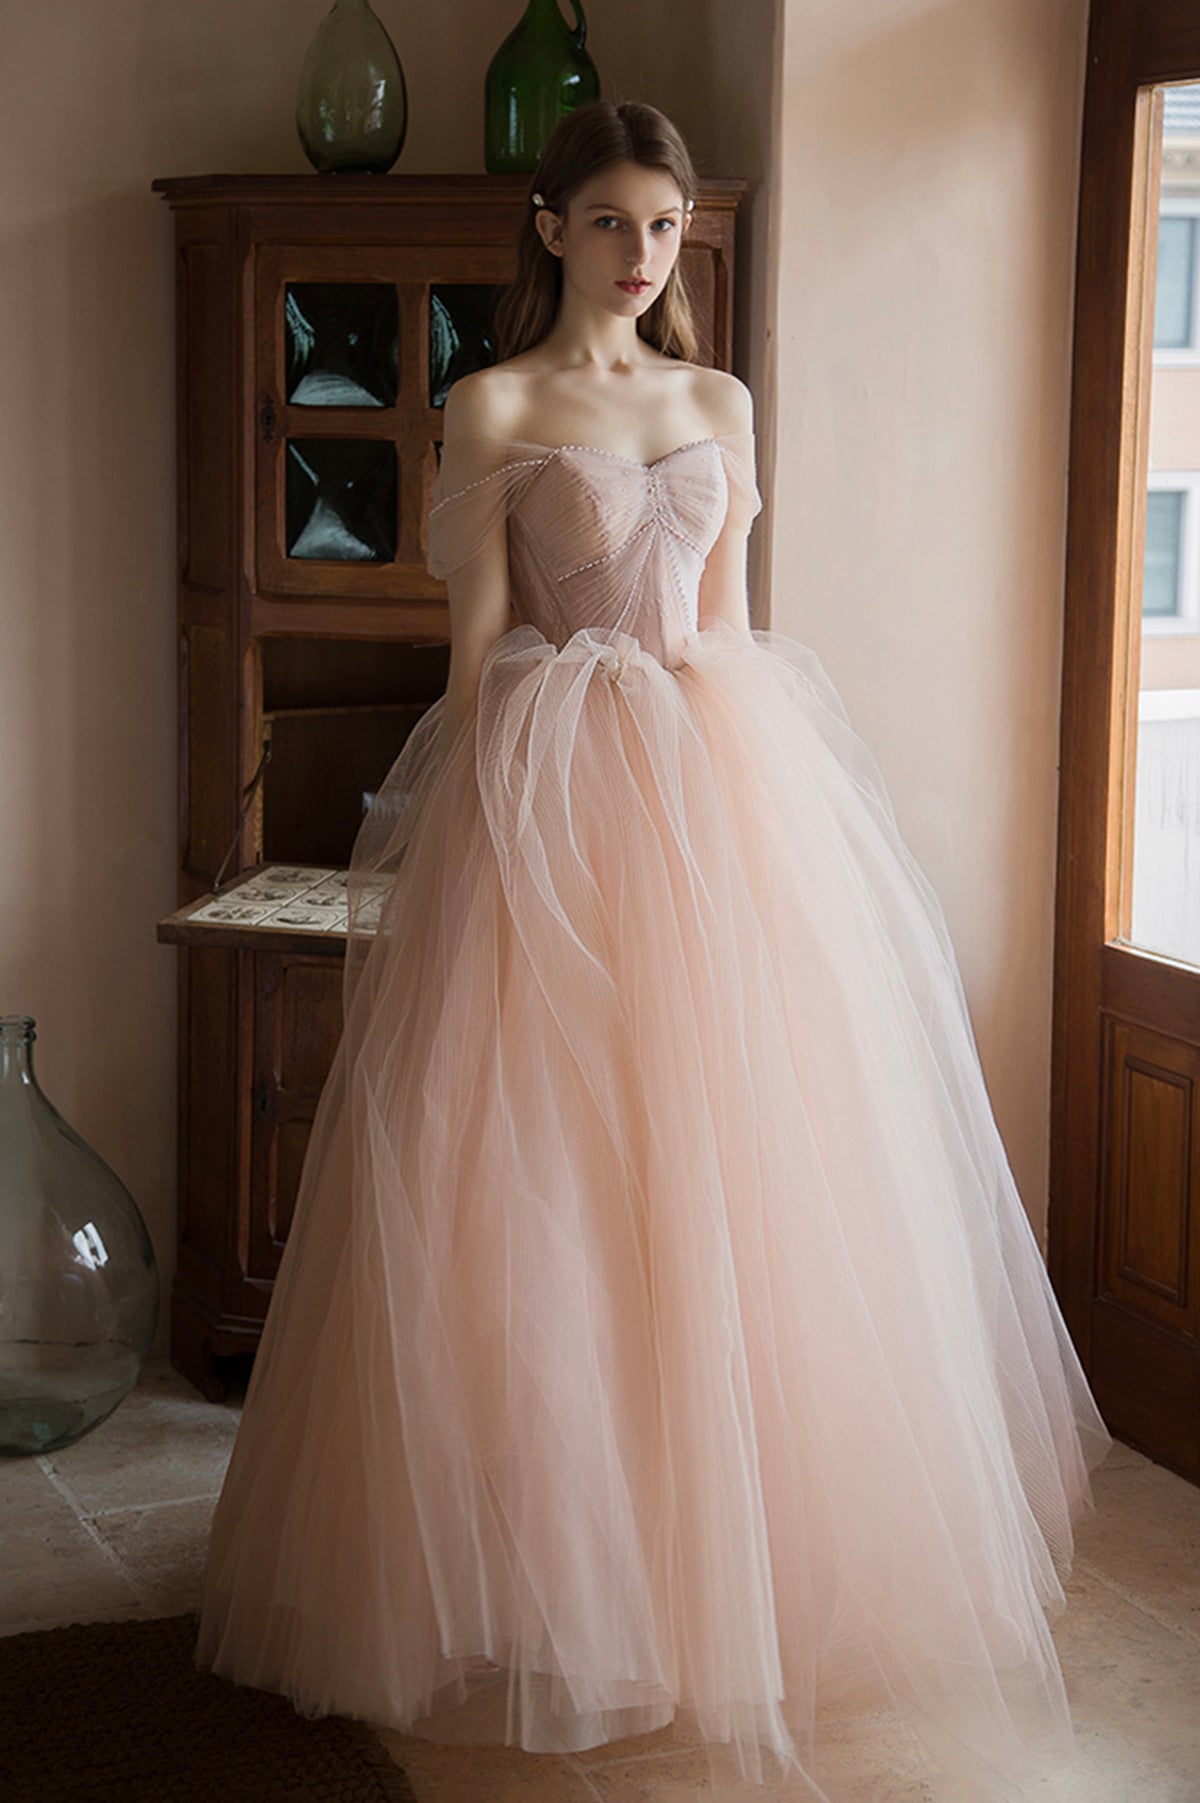 Beautiful Shiny Tulle Long A-Line Pink Corset Prom Dress, Off the Shou